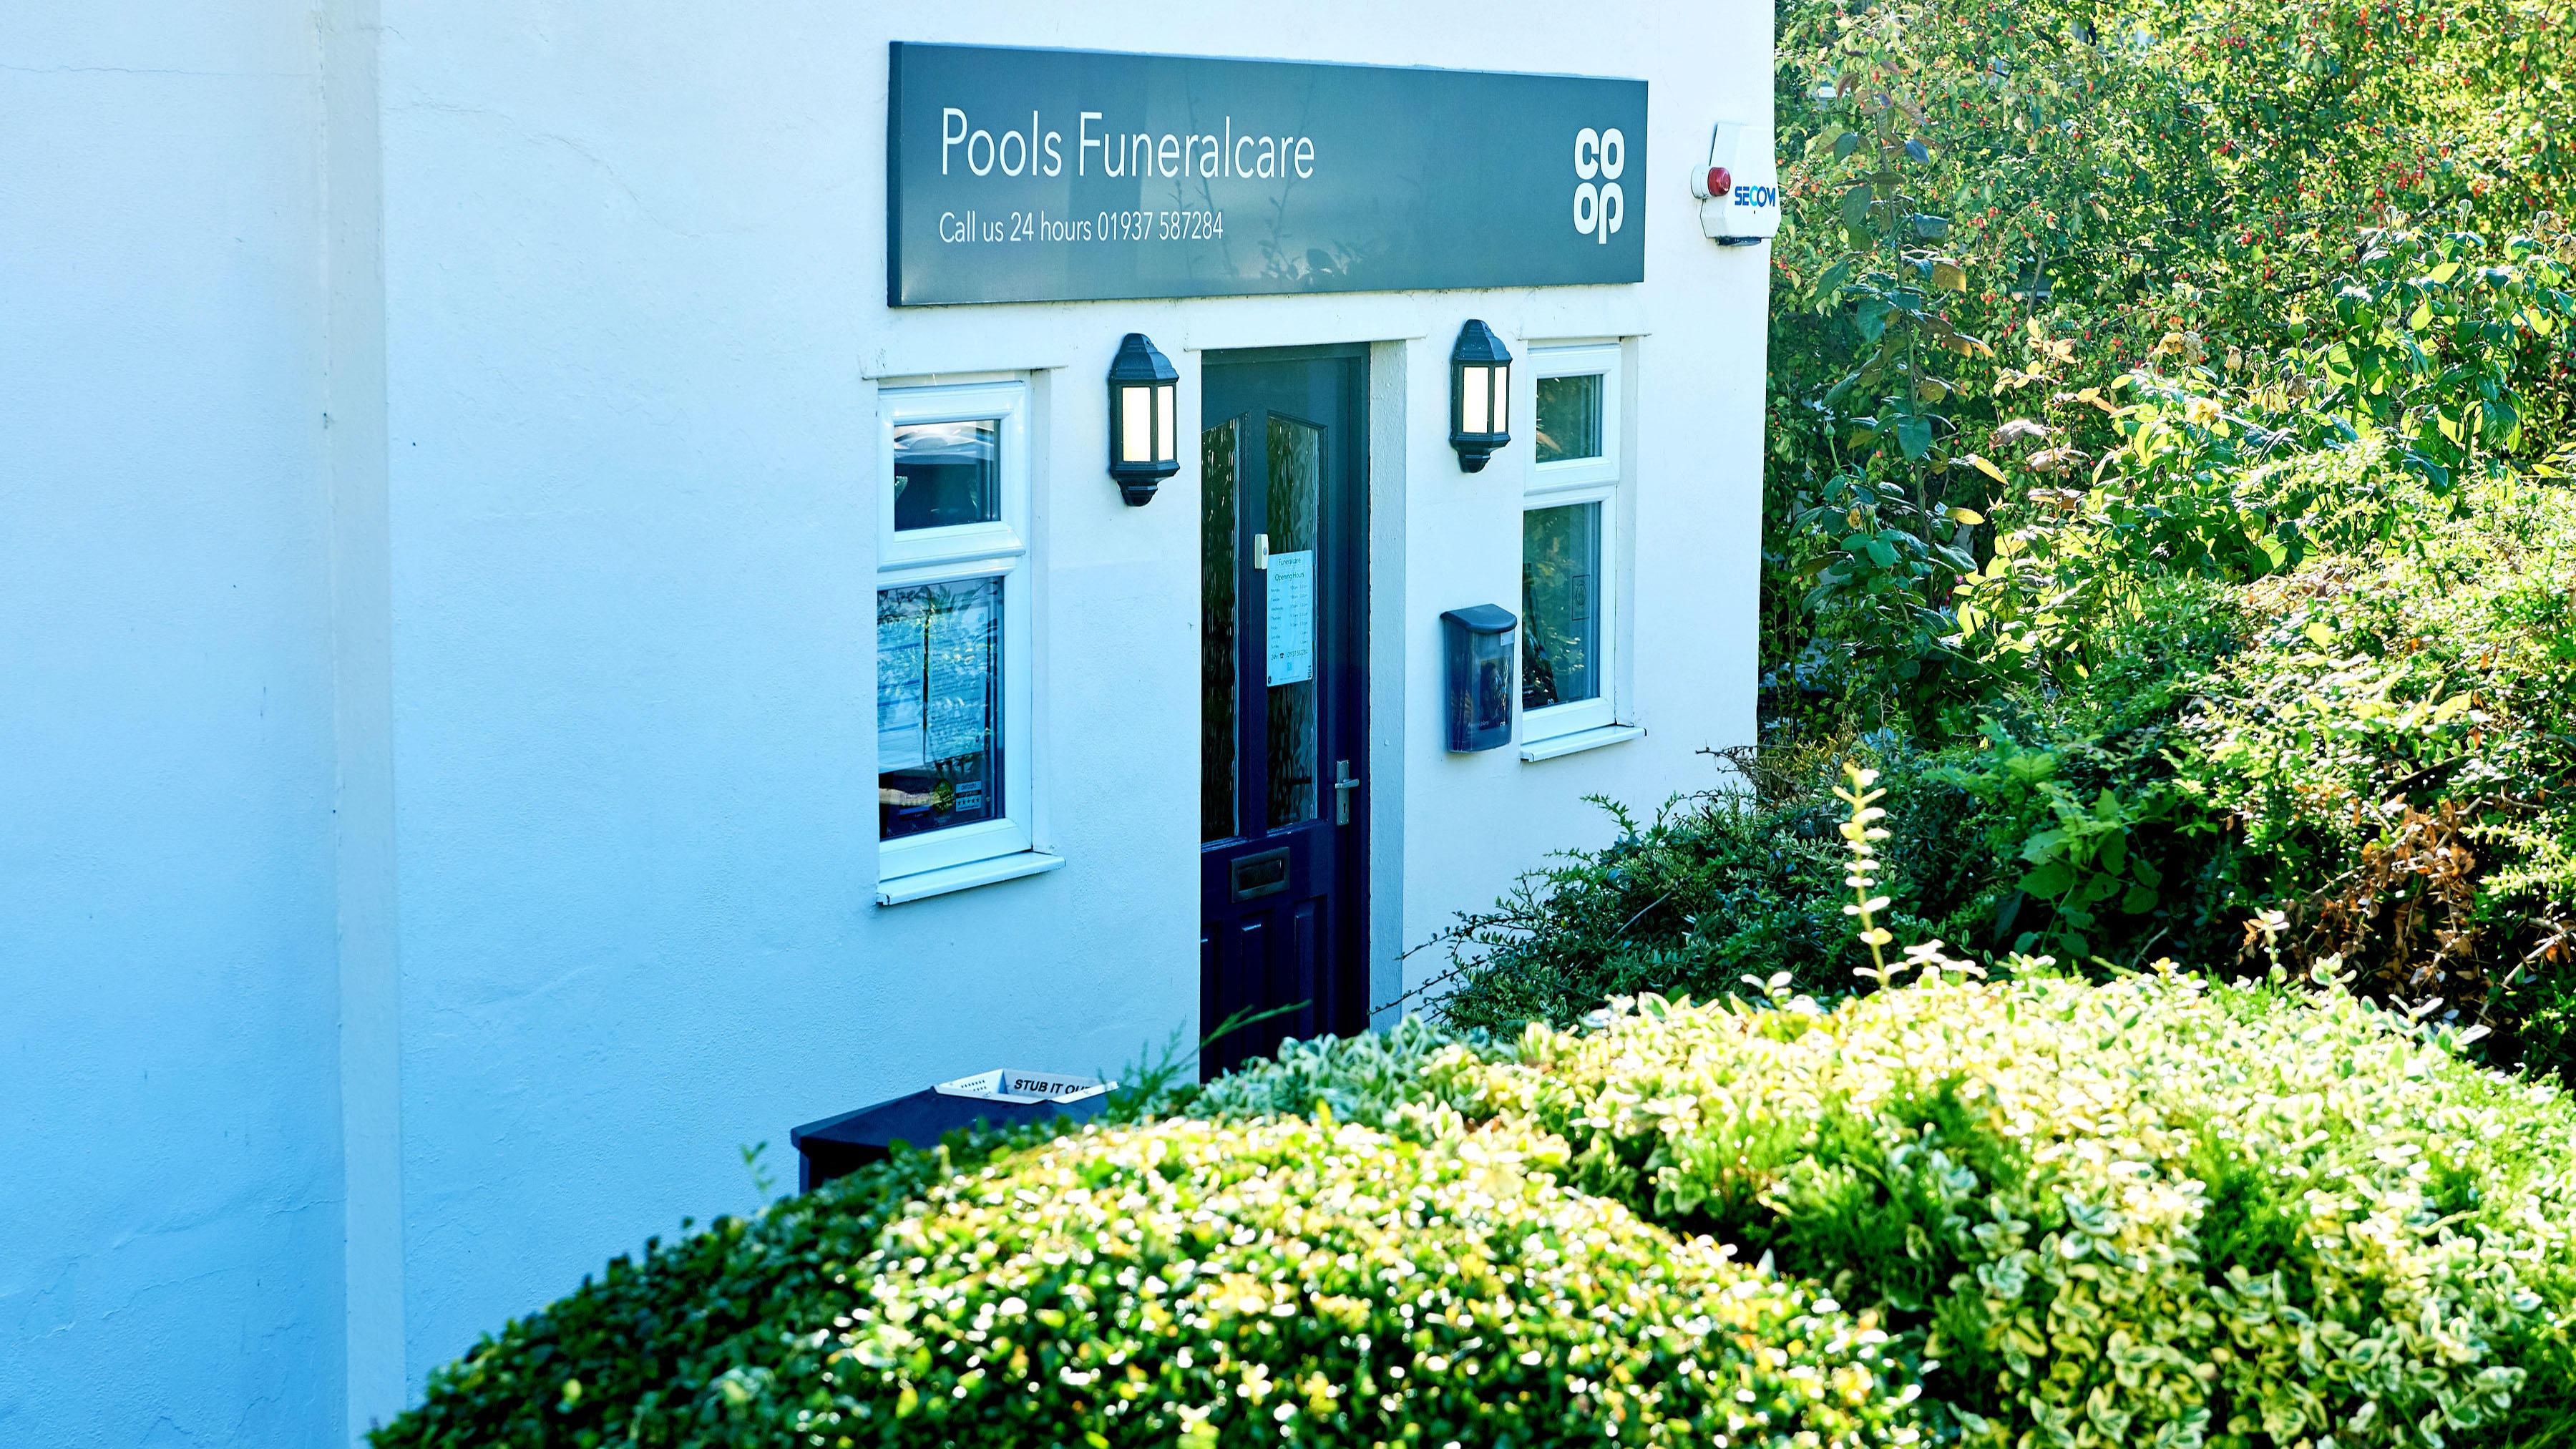 Pools Funeralcare Wetherby Pools Funeralcare Wetherby 01937 587284